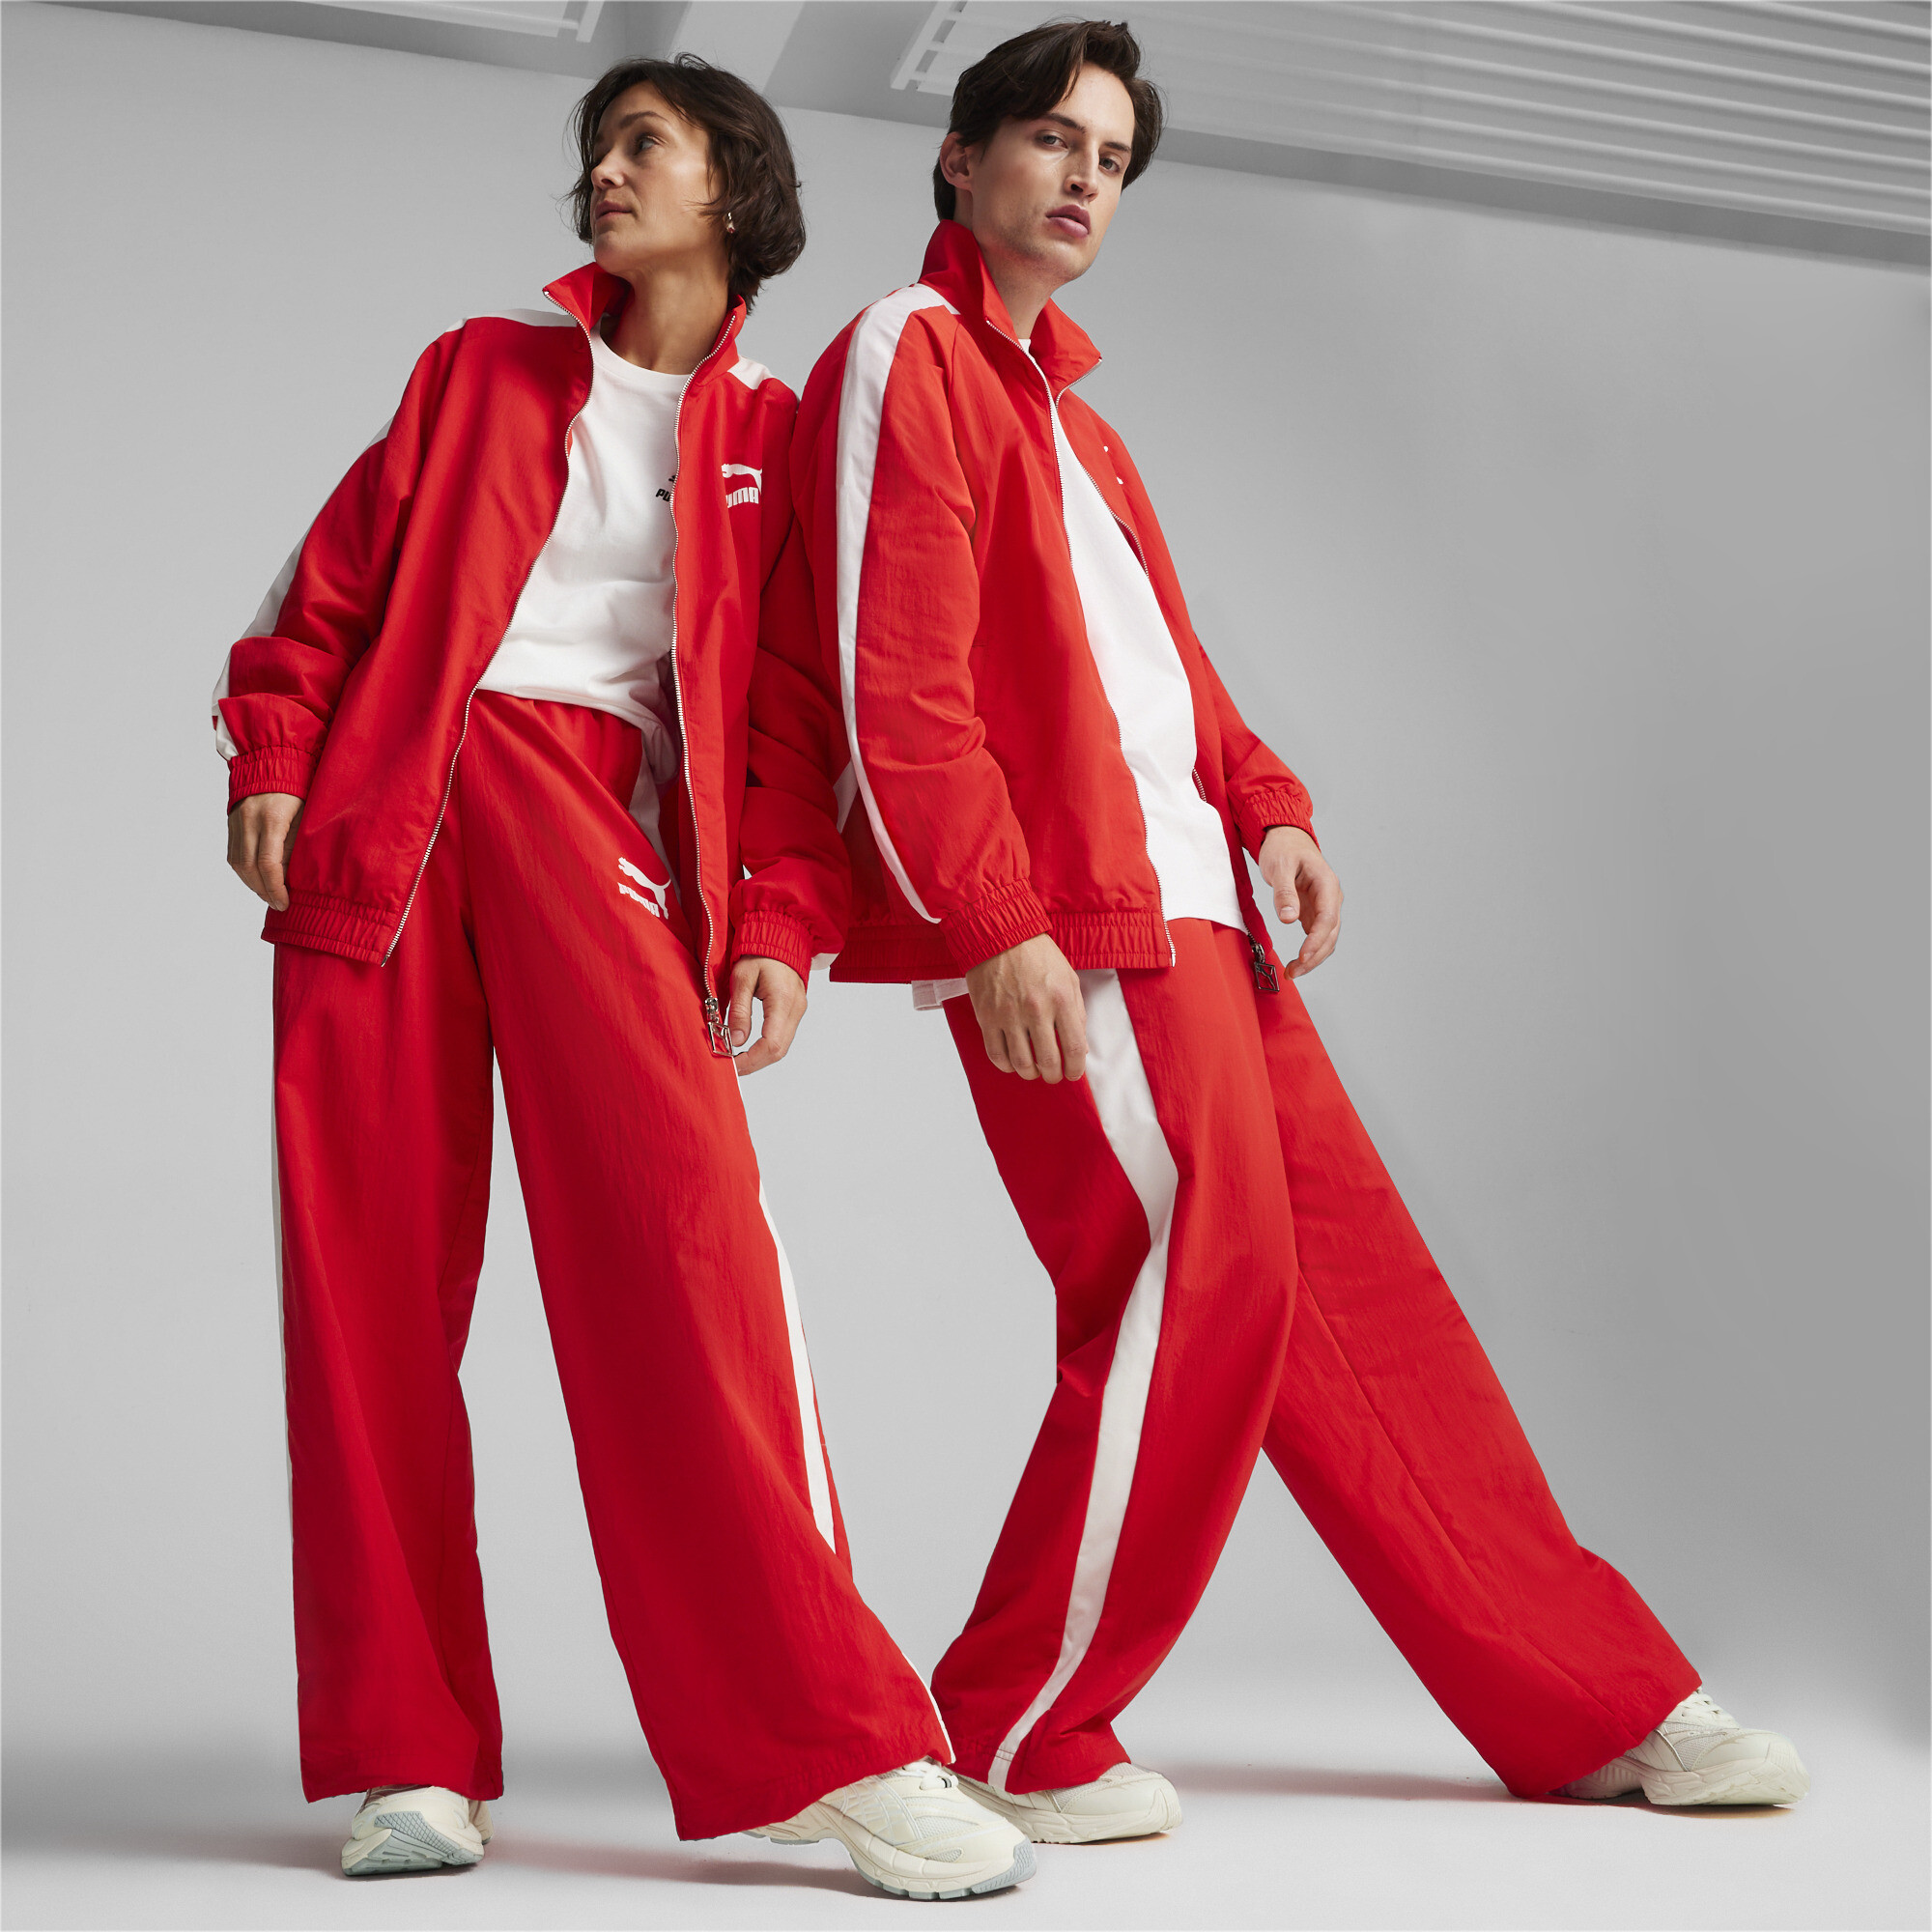 Puma T7's Oversized Track Pants, Red, Size M, Women